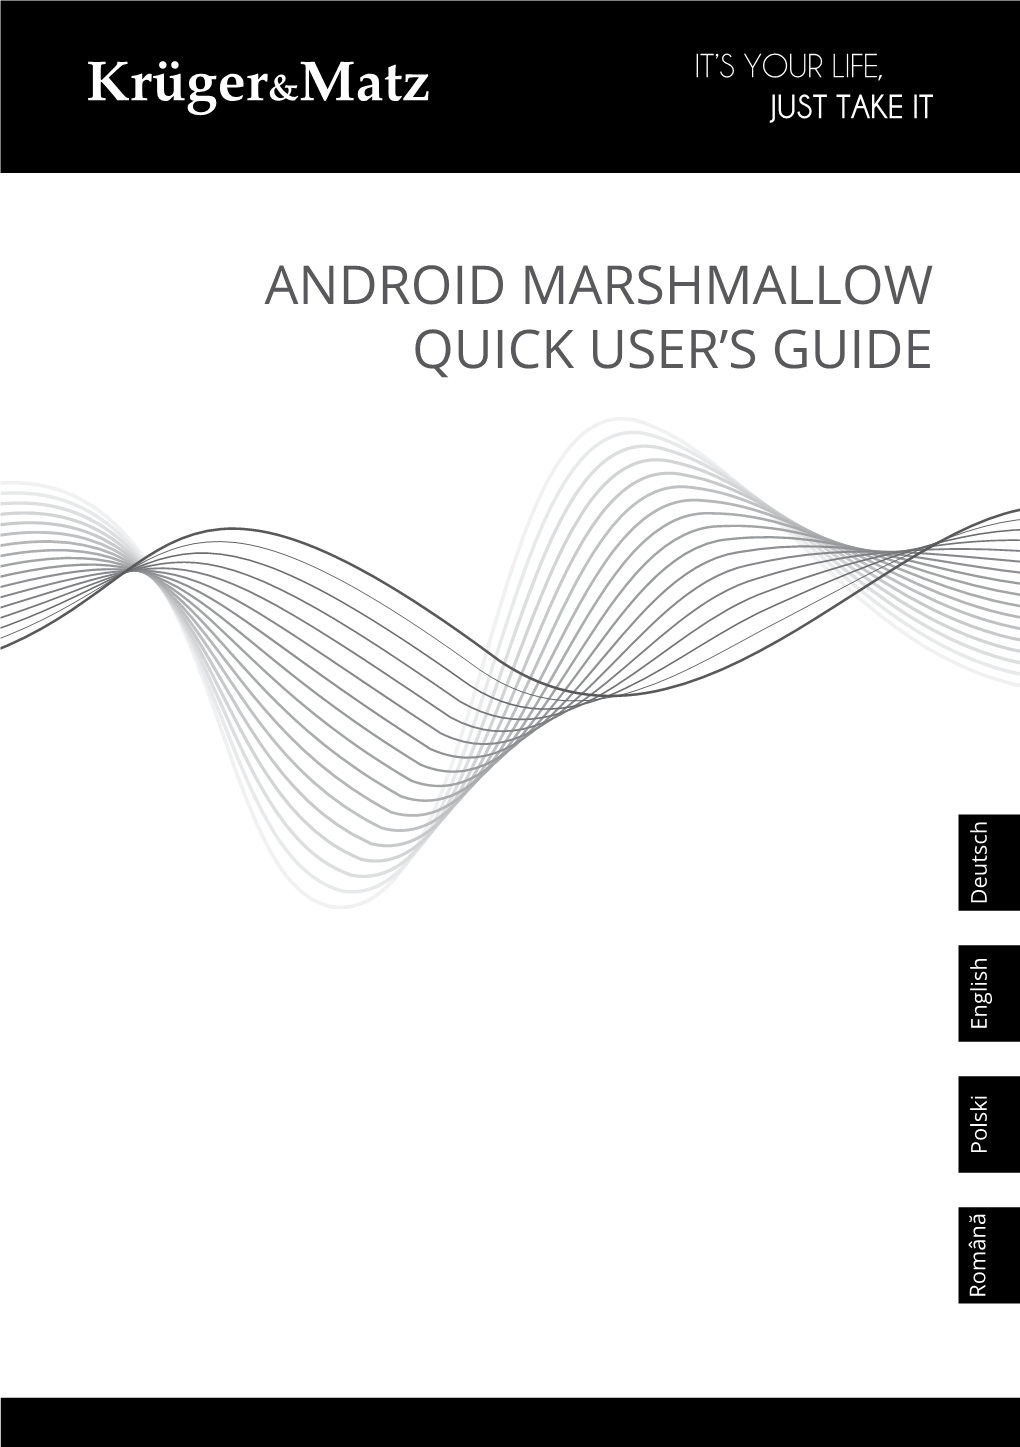 Android Marshmallow Quick User's Guide